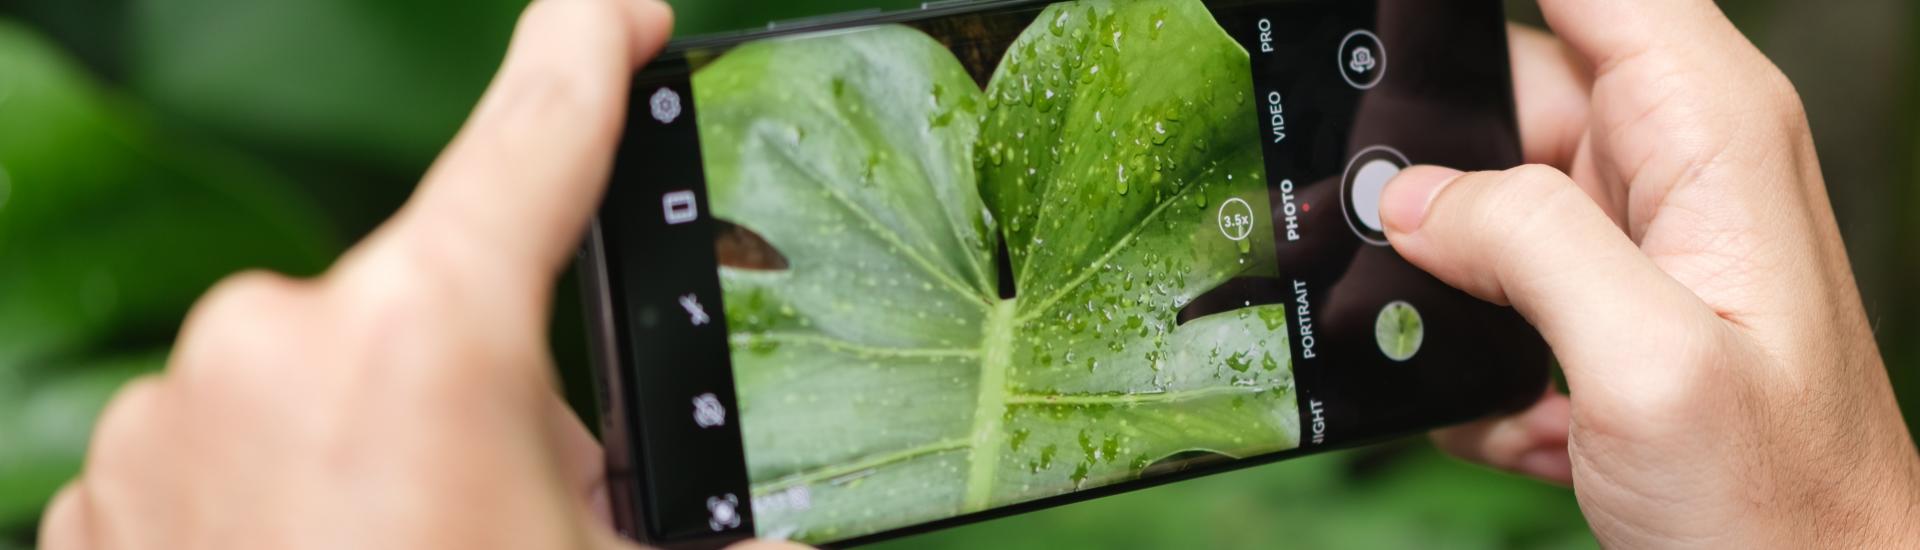 Hands using smart phone to photograph tropical leaf